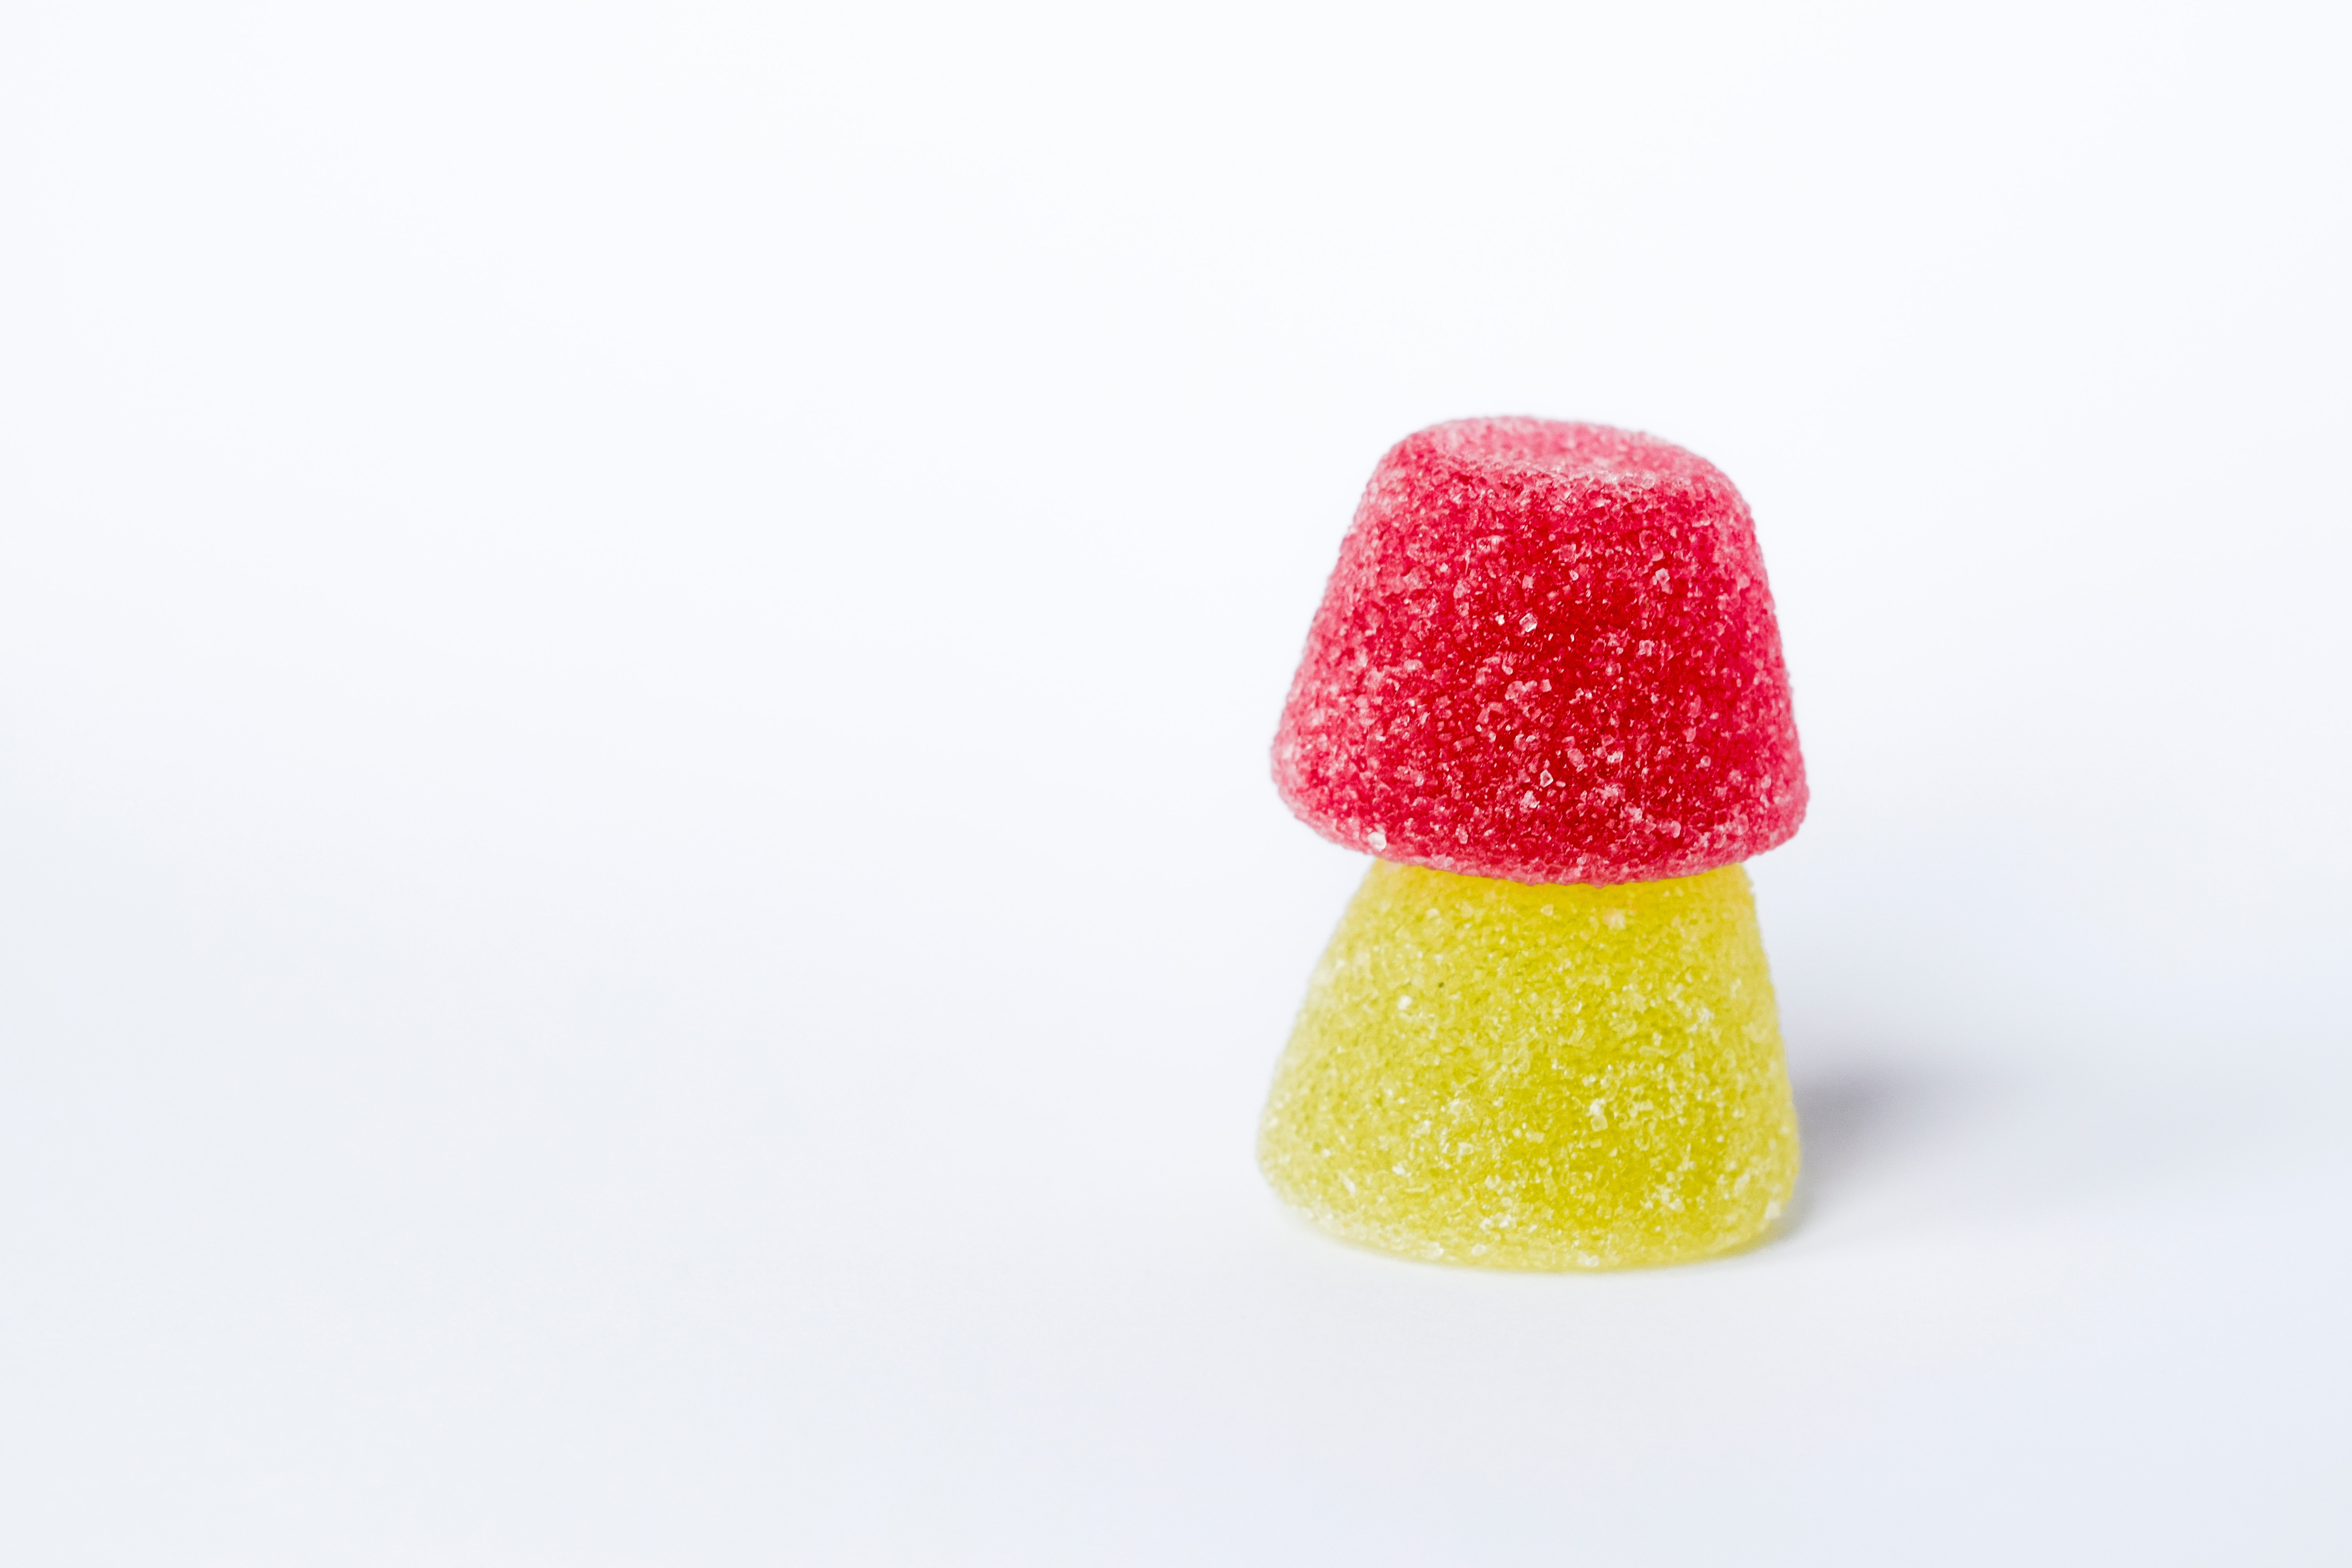 Red and yellow gummy candies photo